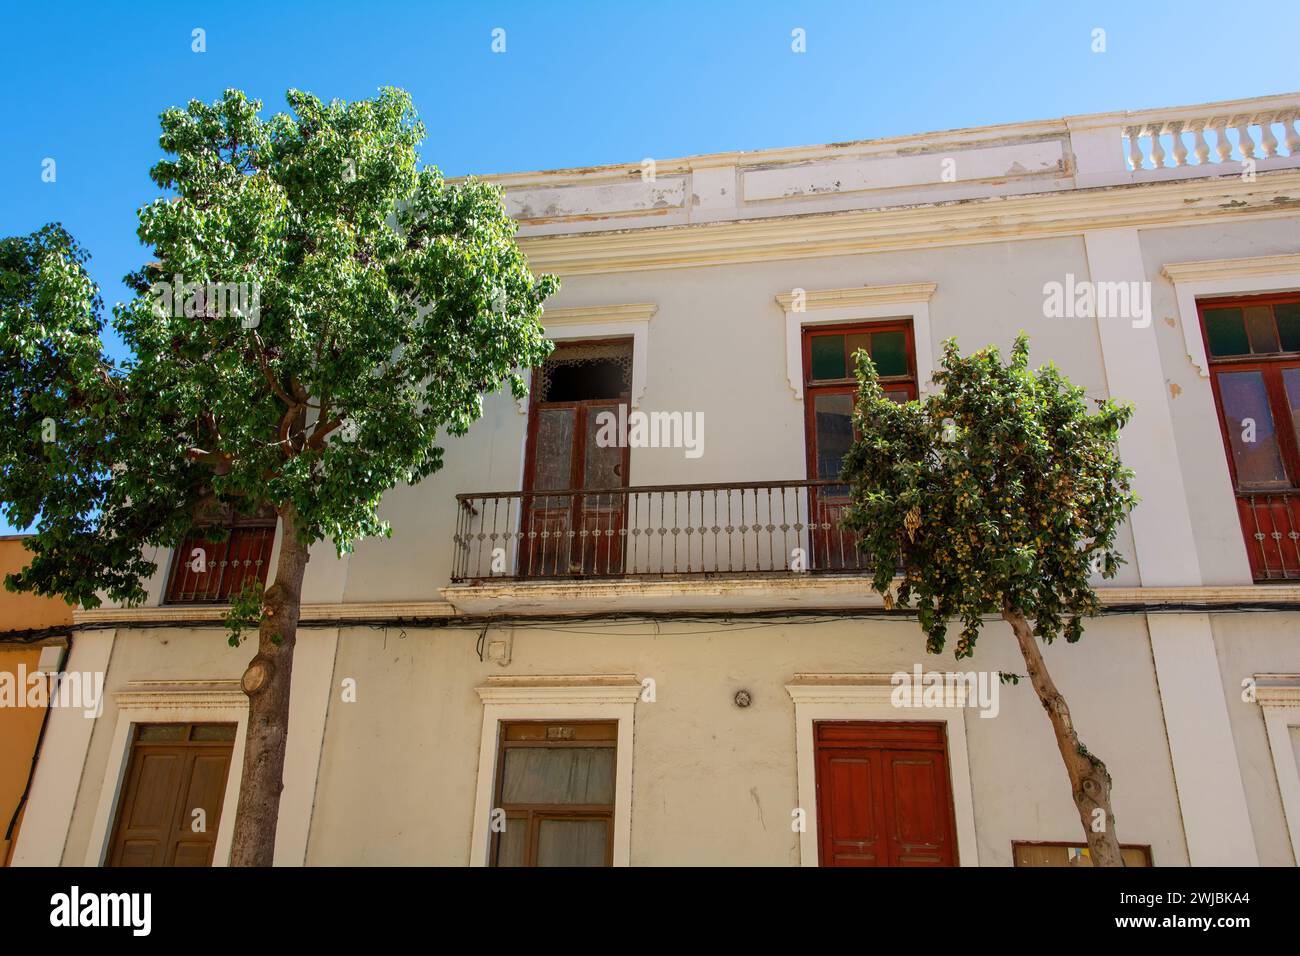 Old house with balcony and a tree in Spain on the Canary Island of Gran Canaria Stock Photo